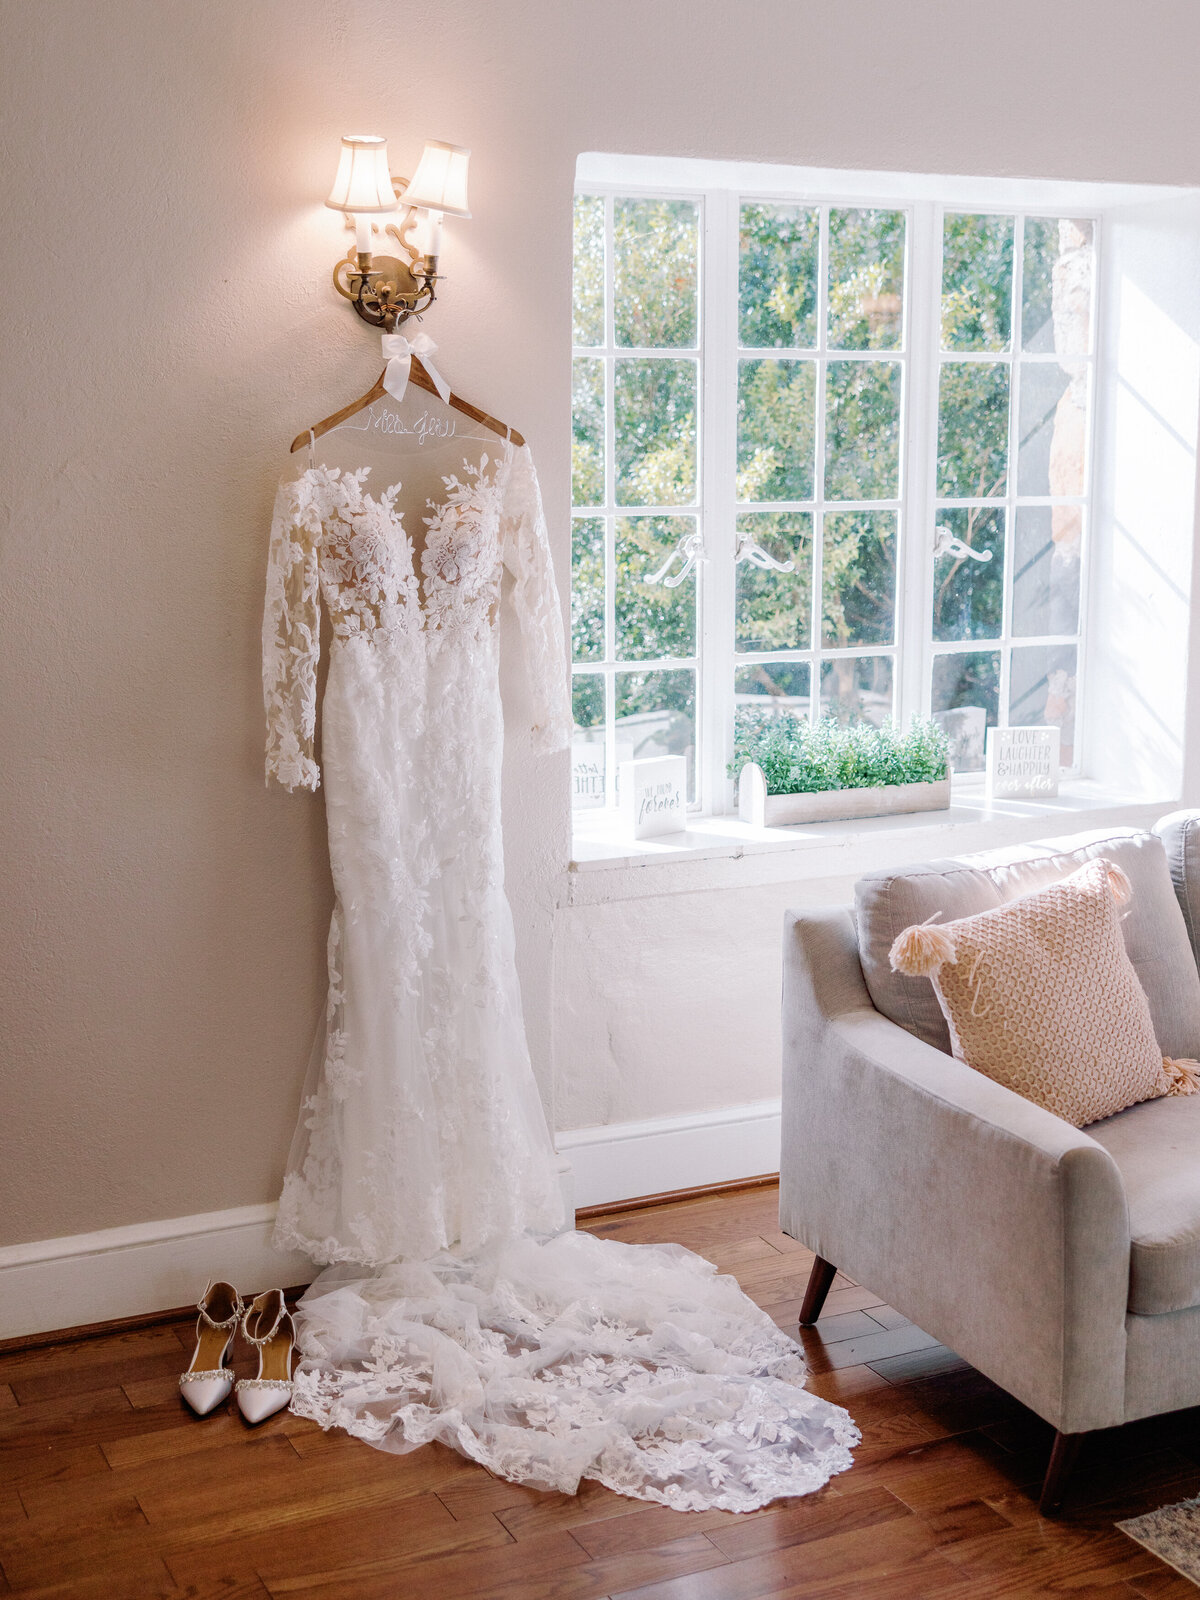 The bride's lace long sleeve wedding dress on a hanger